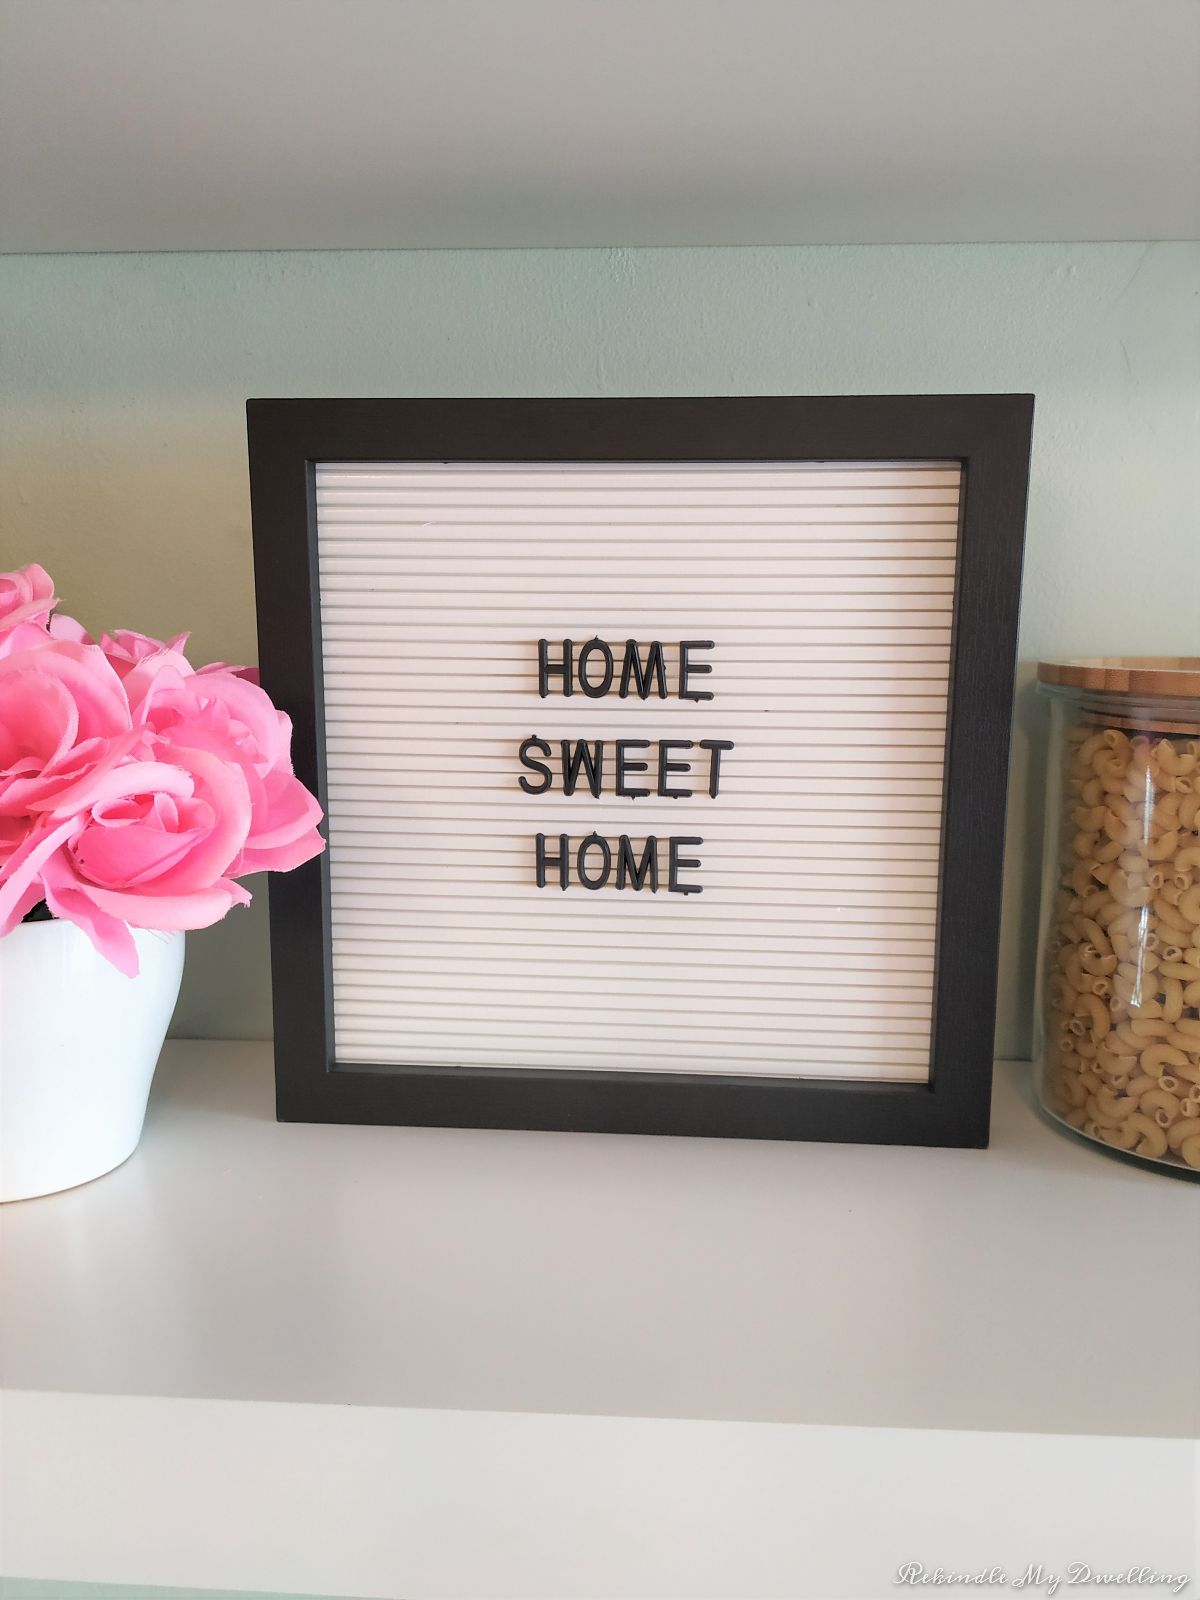 Small sign with Home Sweet Home written on it.